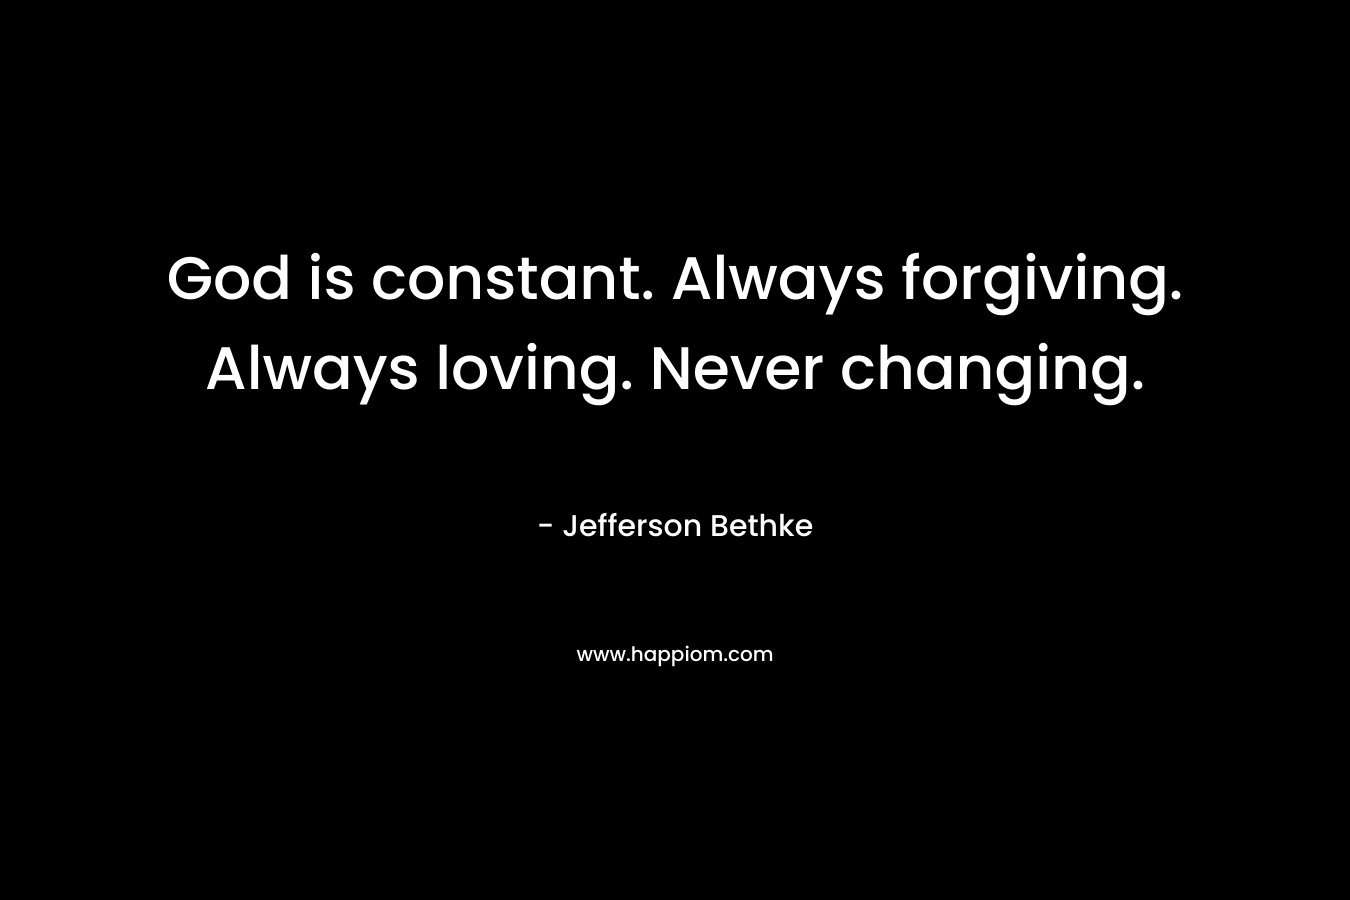 God is constant. Always forgiving. Always loving. Never changing.